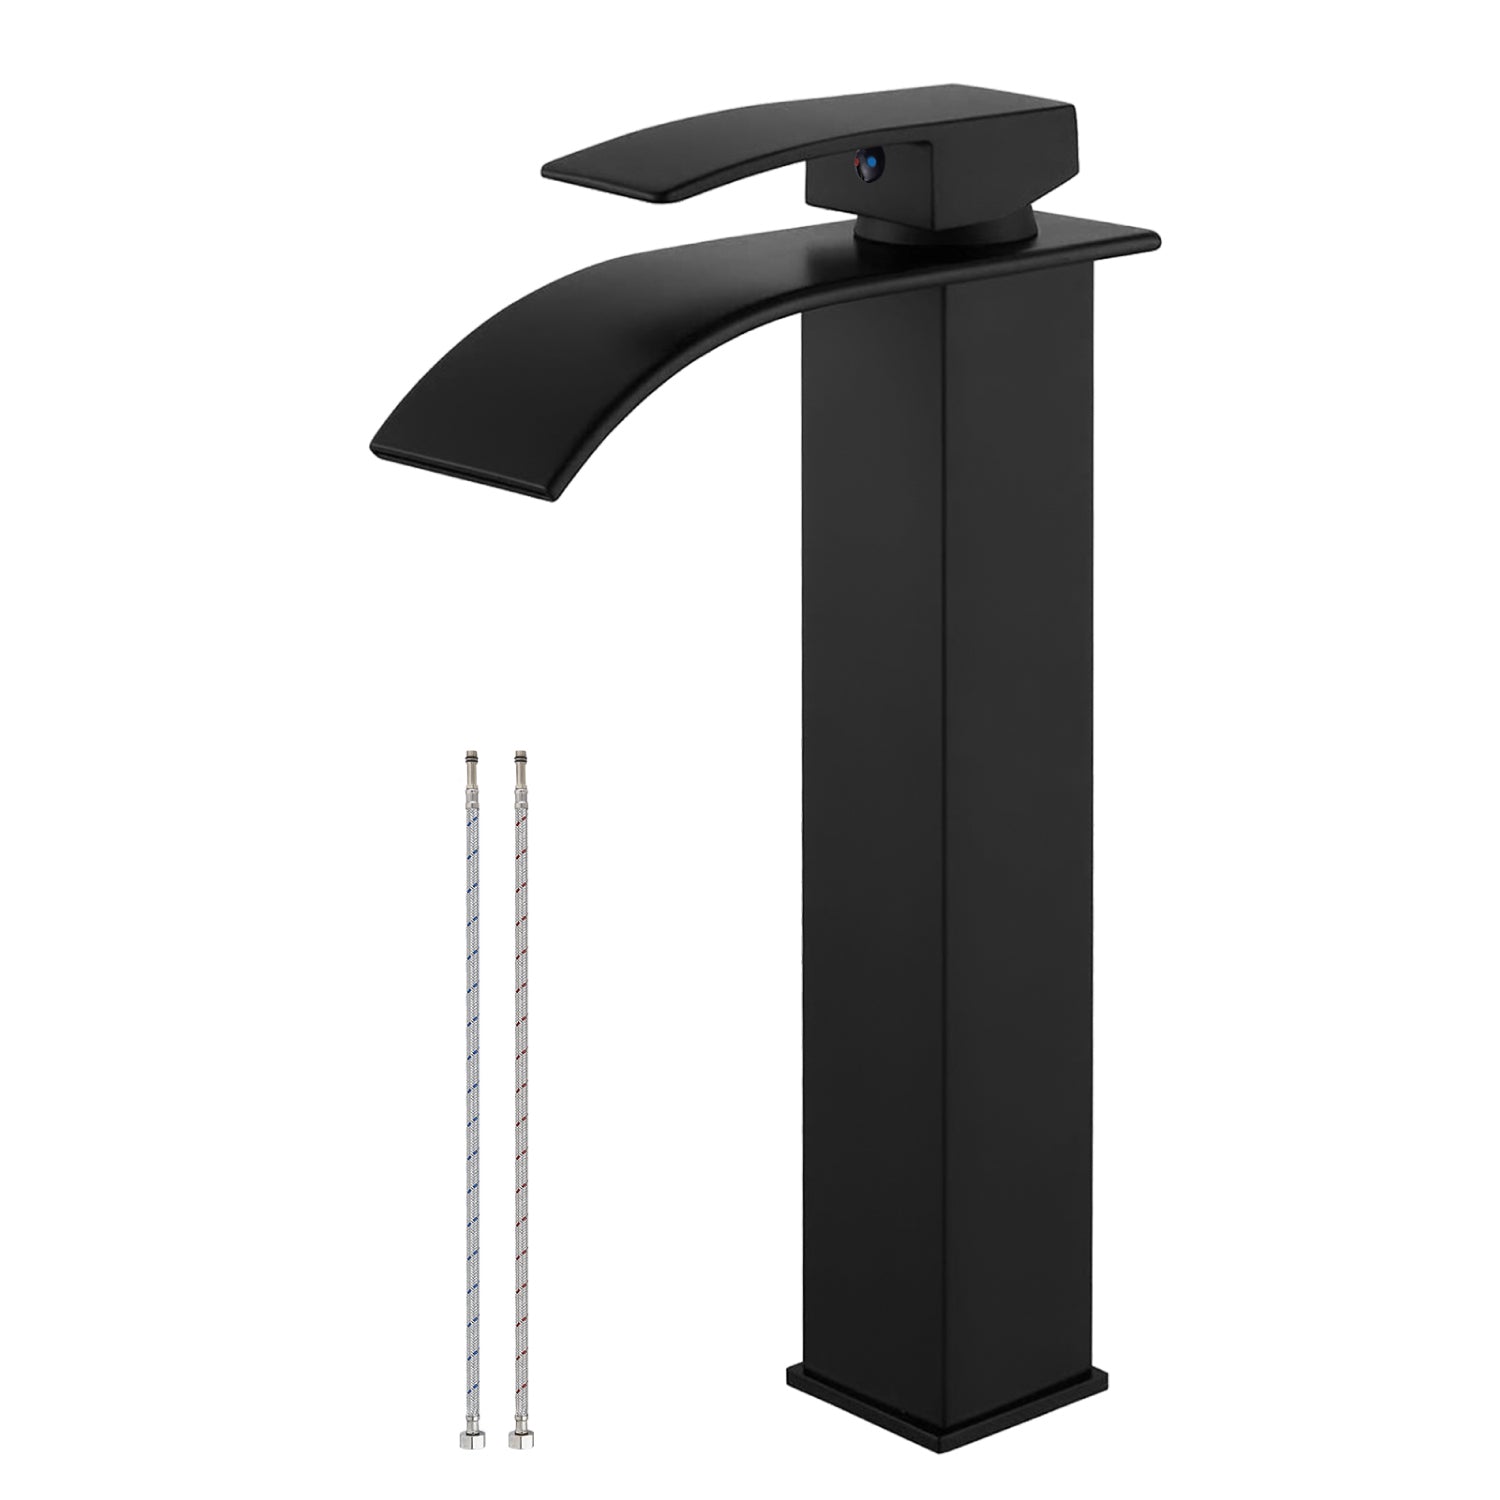 Airuida Vessel Sink Faucet, Tall Waterfall Bathroom Faucet, Single Handle One Hole Mixer Bowl Tap with Large Rectangular Spout, Bar Sink Faucet Lavatory Vanity